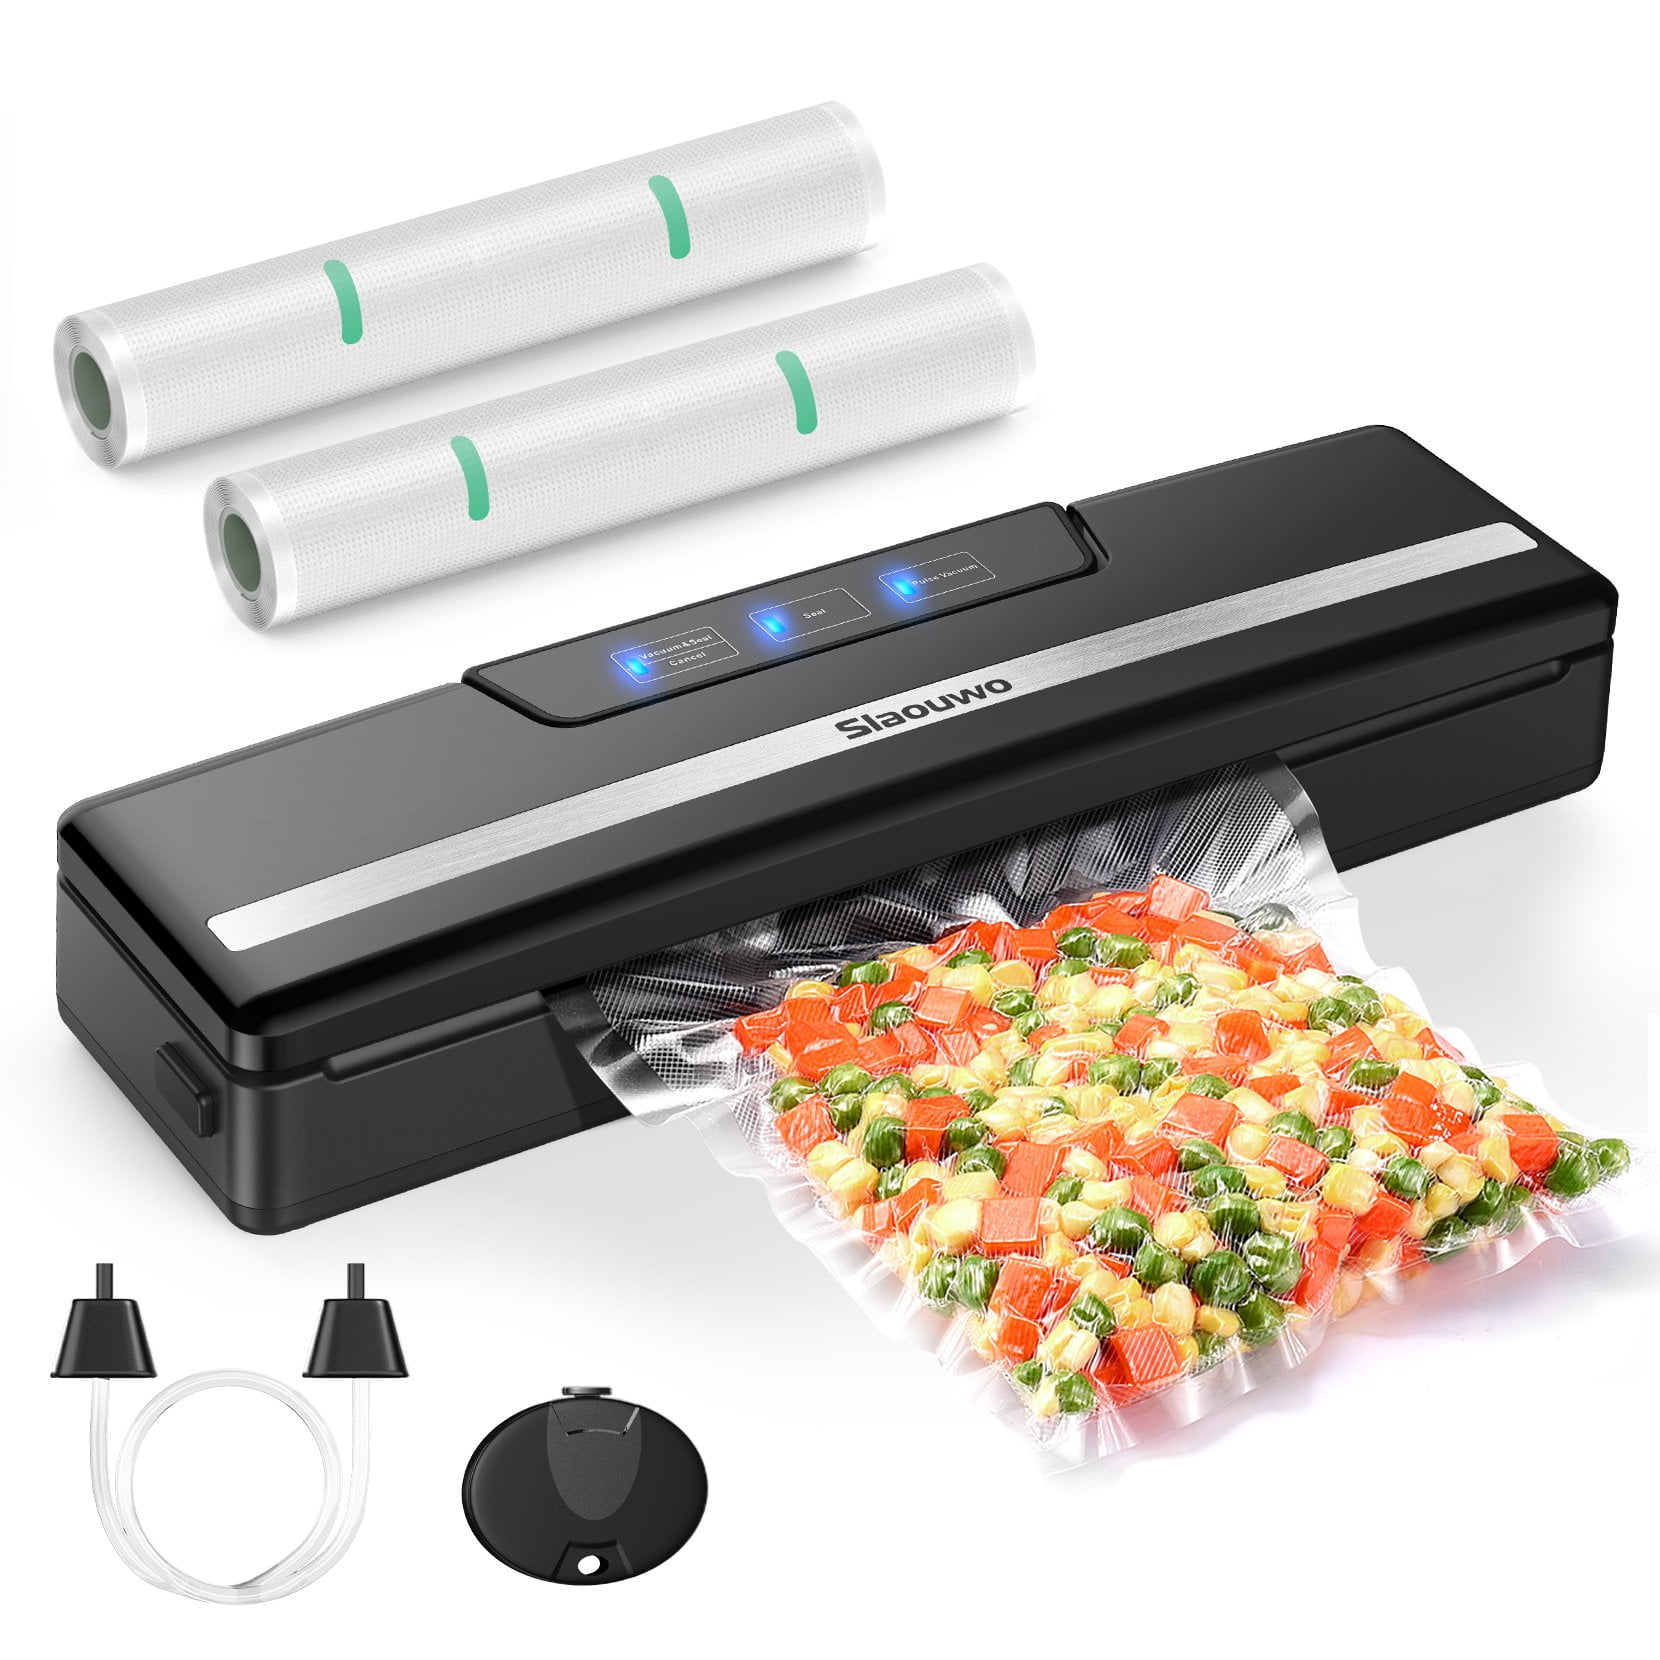 Vacuum Sealer with Built-in Roll Storage & Cutter, Automatic Dry/Moist Food  Saver w Starter Bags, - Small Kitchen Appliances - Albany, New York, Facebook Marketplace